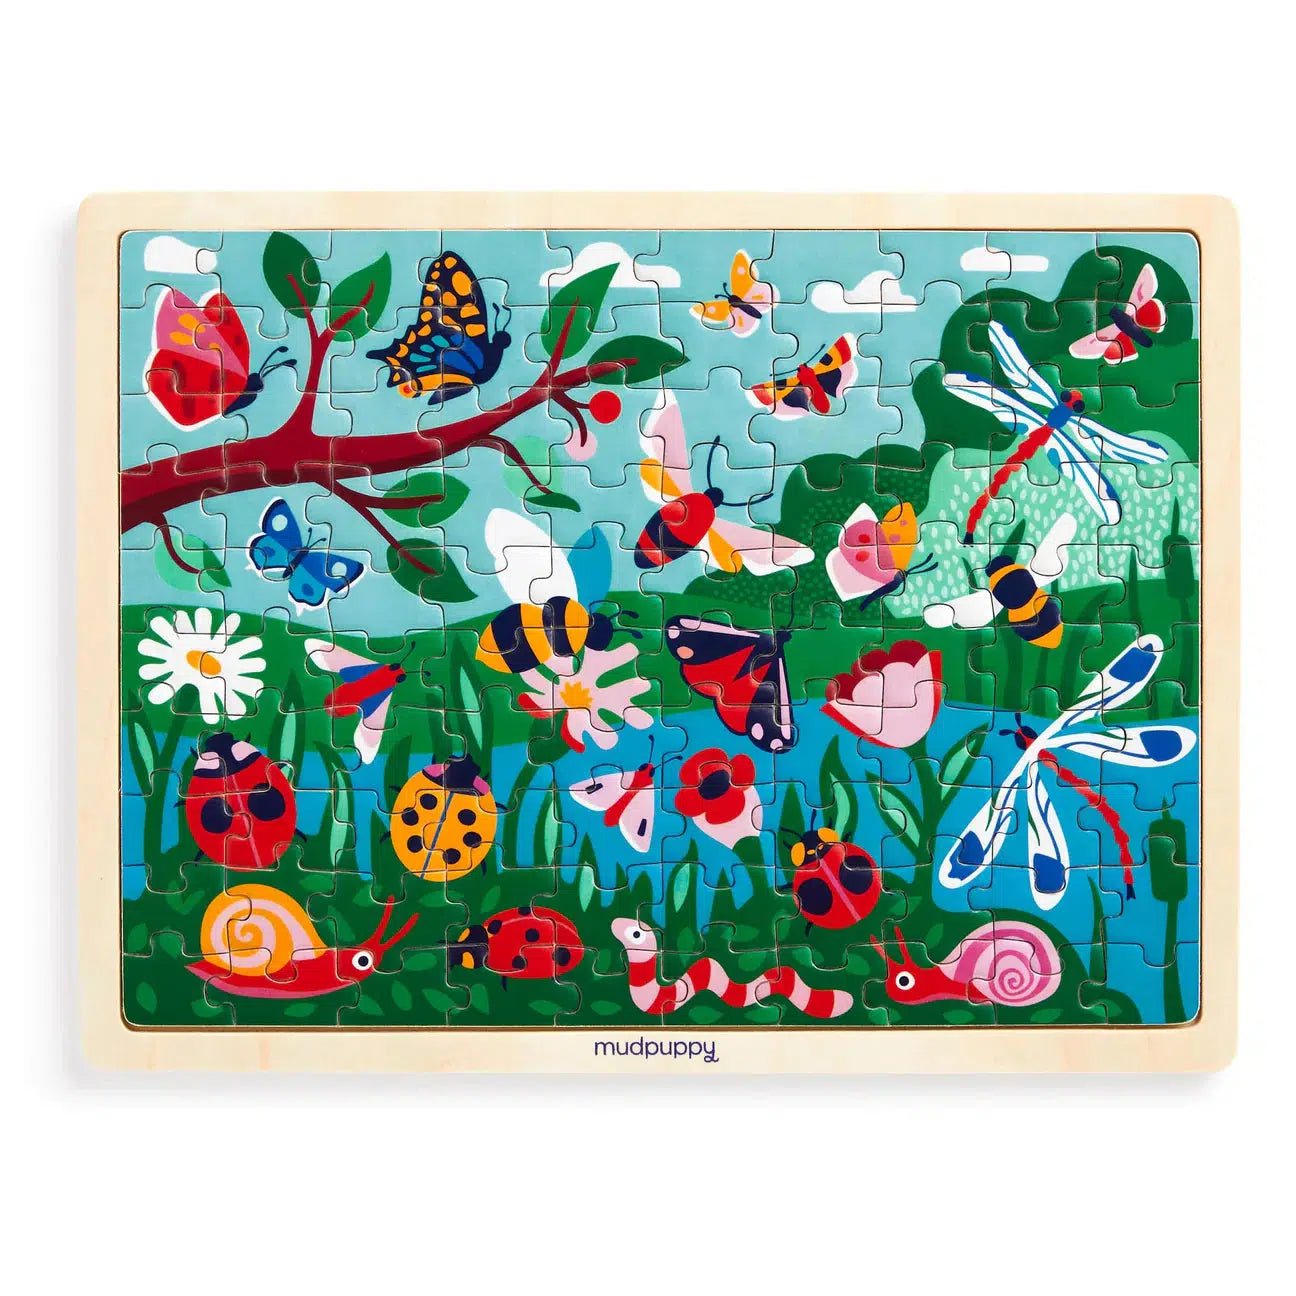 Front view of the completed garden life puzzle in the wooden tray.